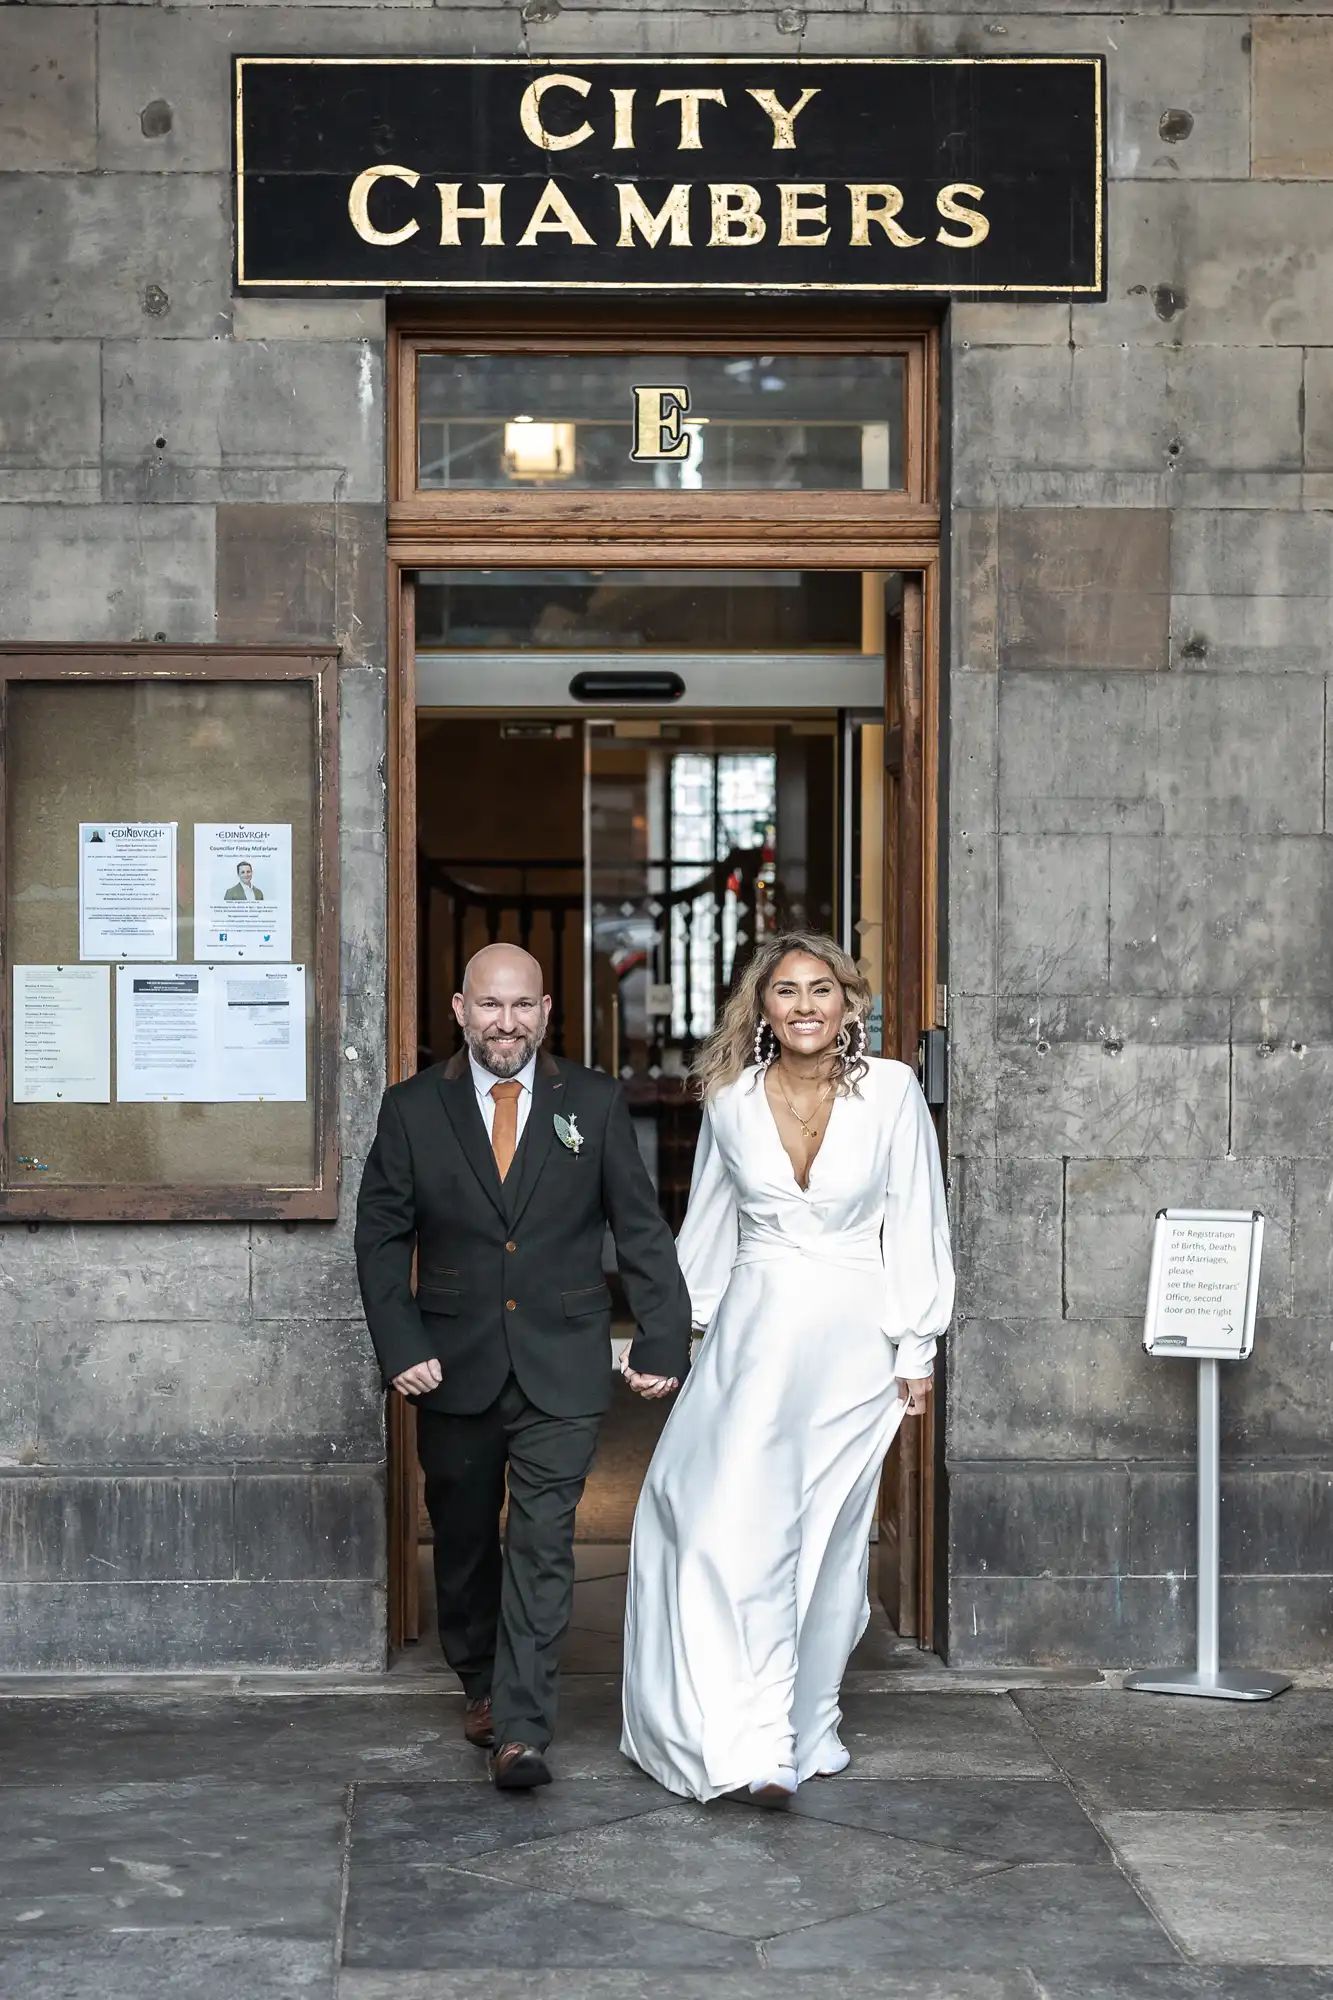 A couple, dressed formally, walks out of a City Chambers building through an open doorway while holding hands, with the woman wearing a white gown and the man in a dark suit.